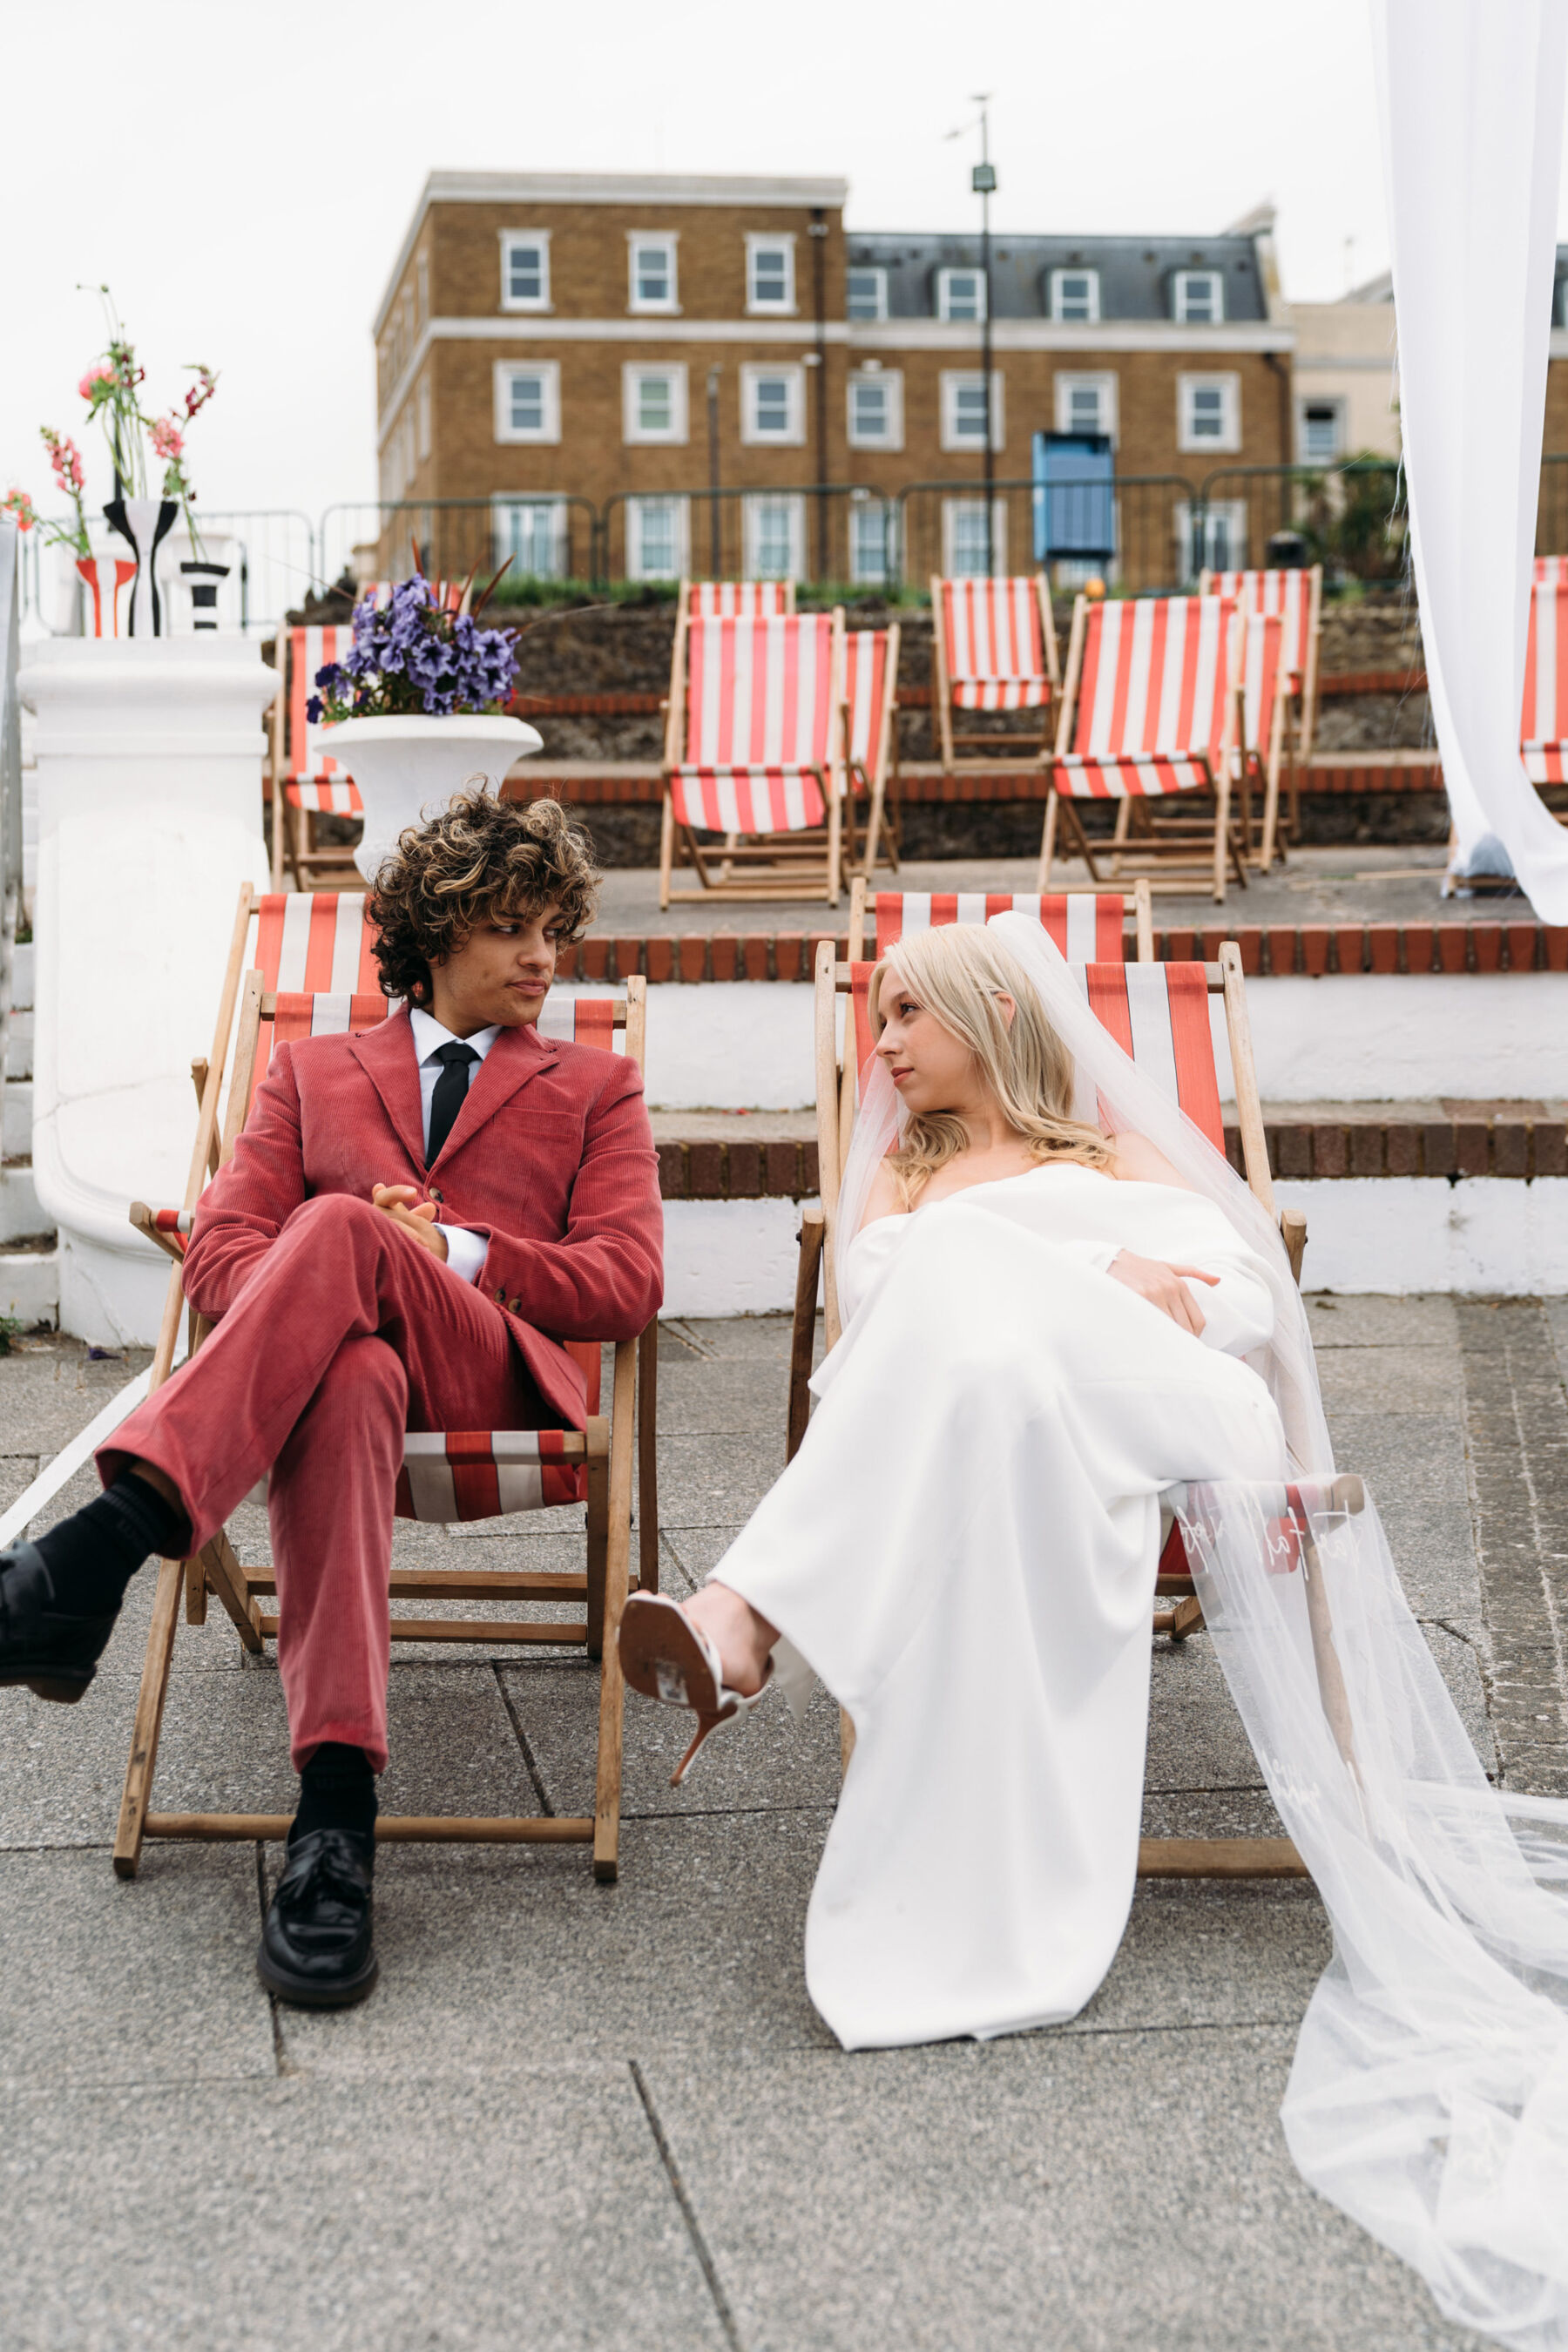 Bride and groom sat on deck chairs. Joanna Bongard Photography.